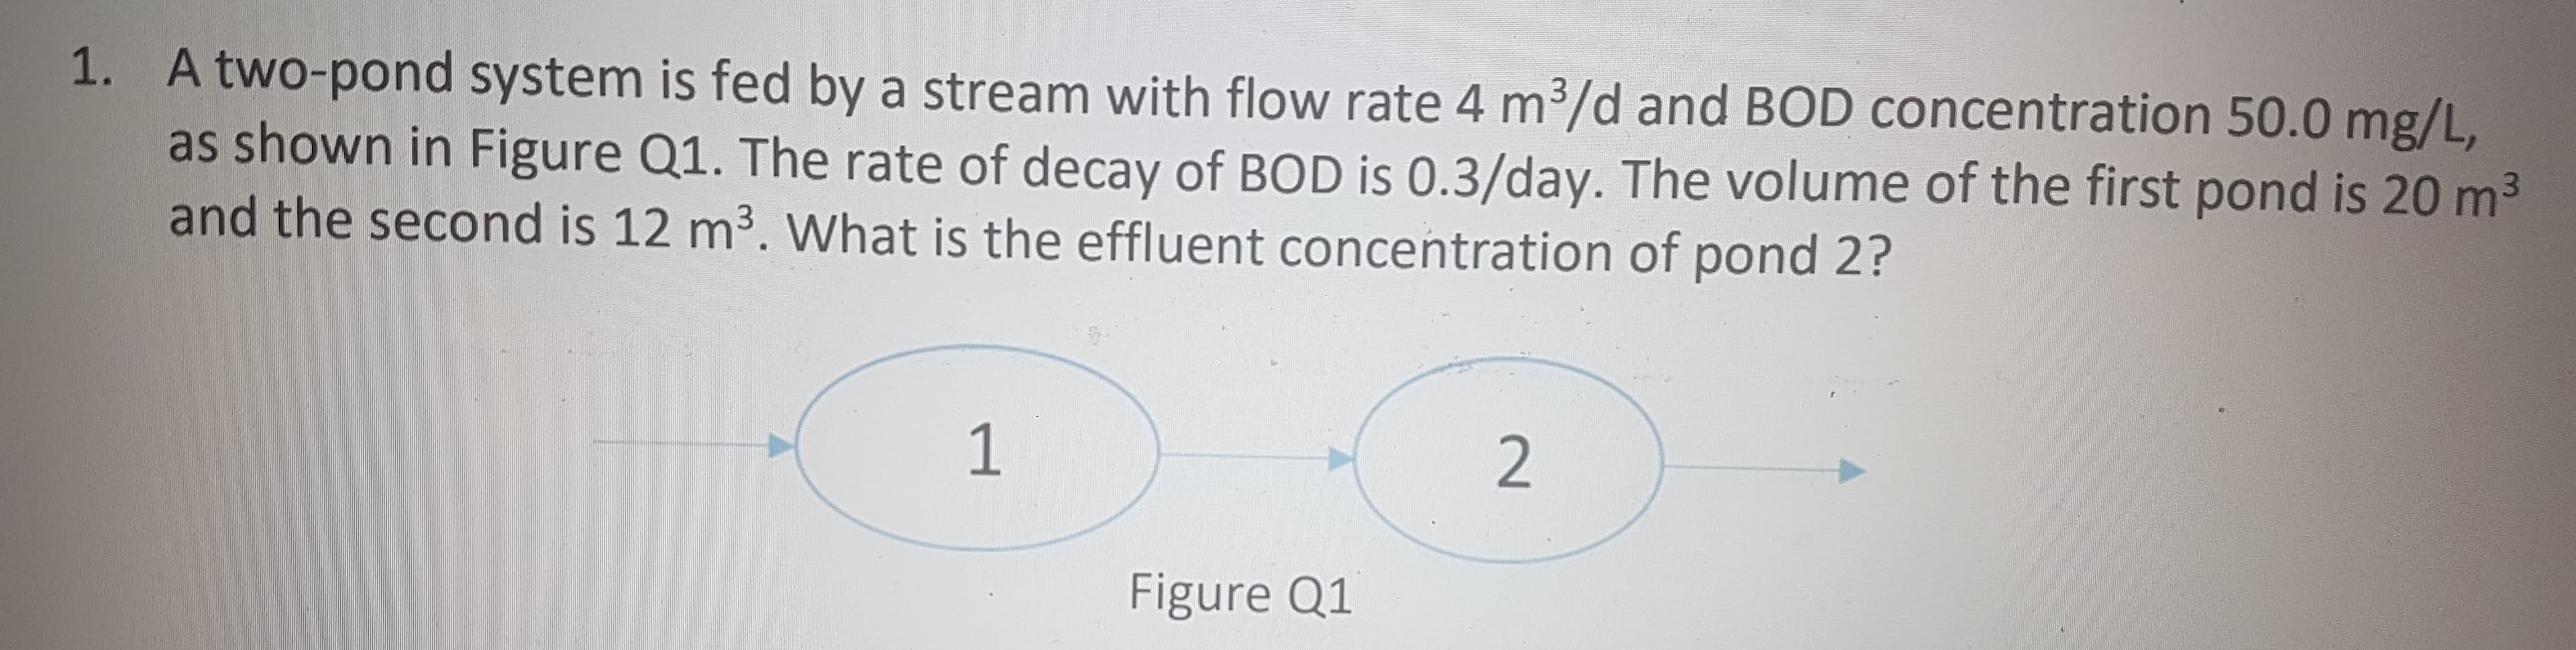 1. A two-pond system is fed by a stream with flow rate 4 m3/d and BOD concentration 50.0 mg/L,
as shown in Figure Q1. The rate of decay of BOD is 0.3/day. The volume of the first pond is 20 m3
and the second is 12 m3. What is the effluent concentration of pond 2?
1
Figure Q1
2
